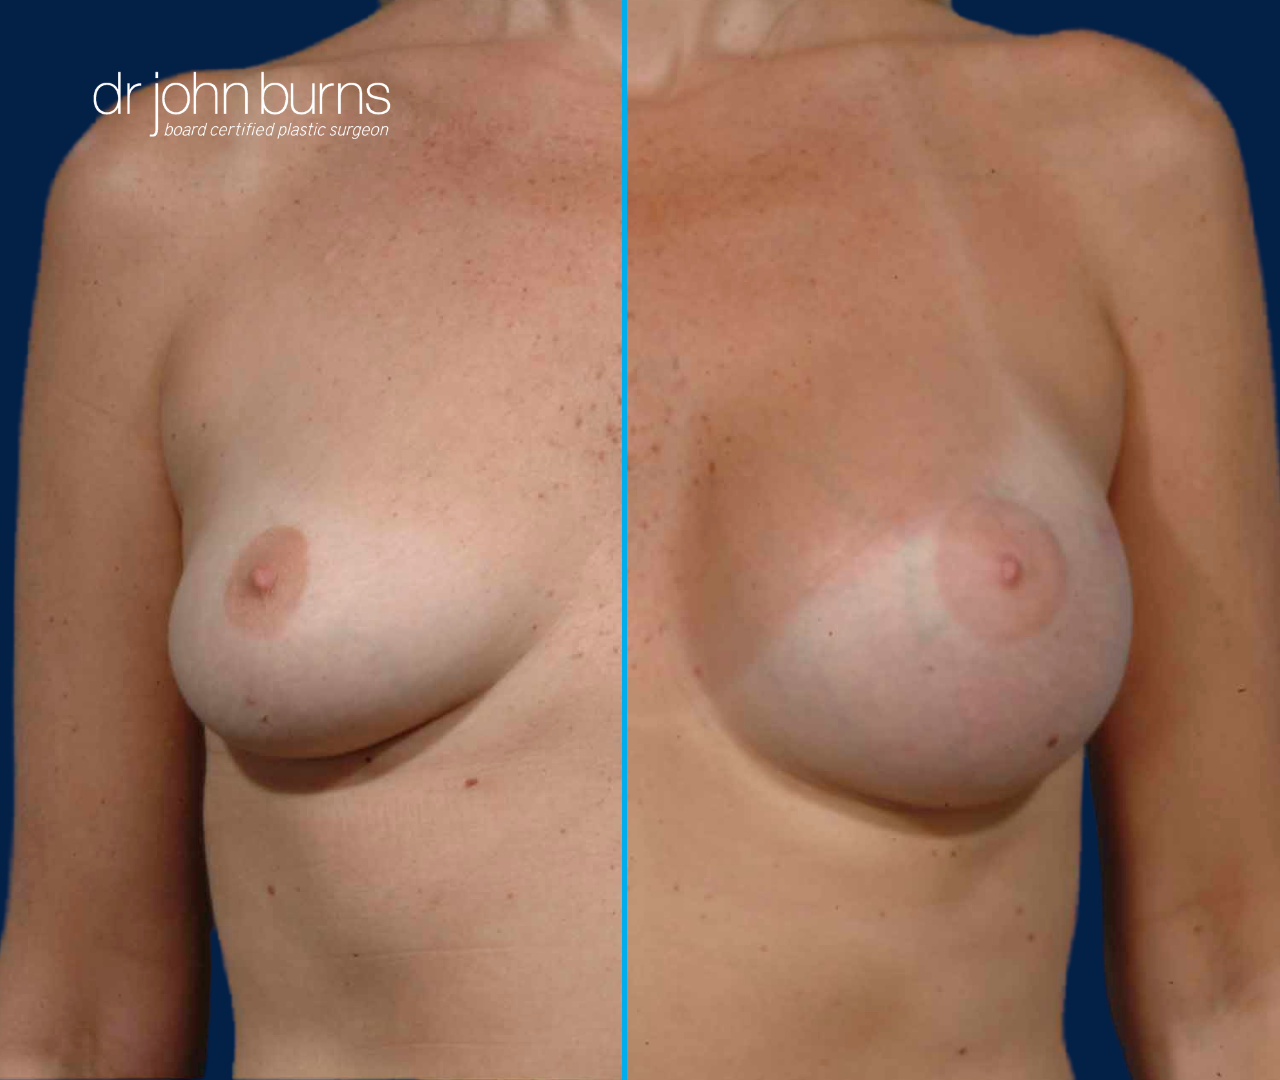 Before and After B to D cup breast augmentation by Dr. John Burns